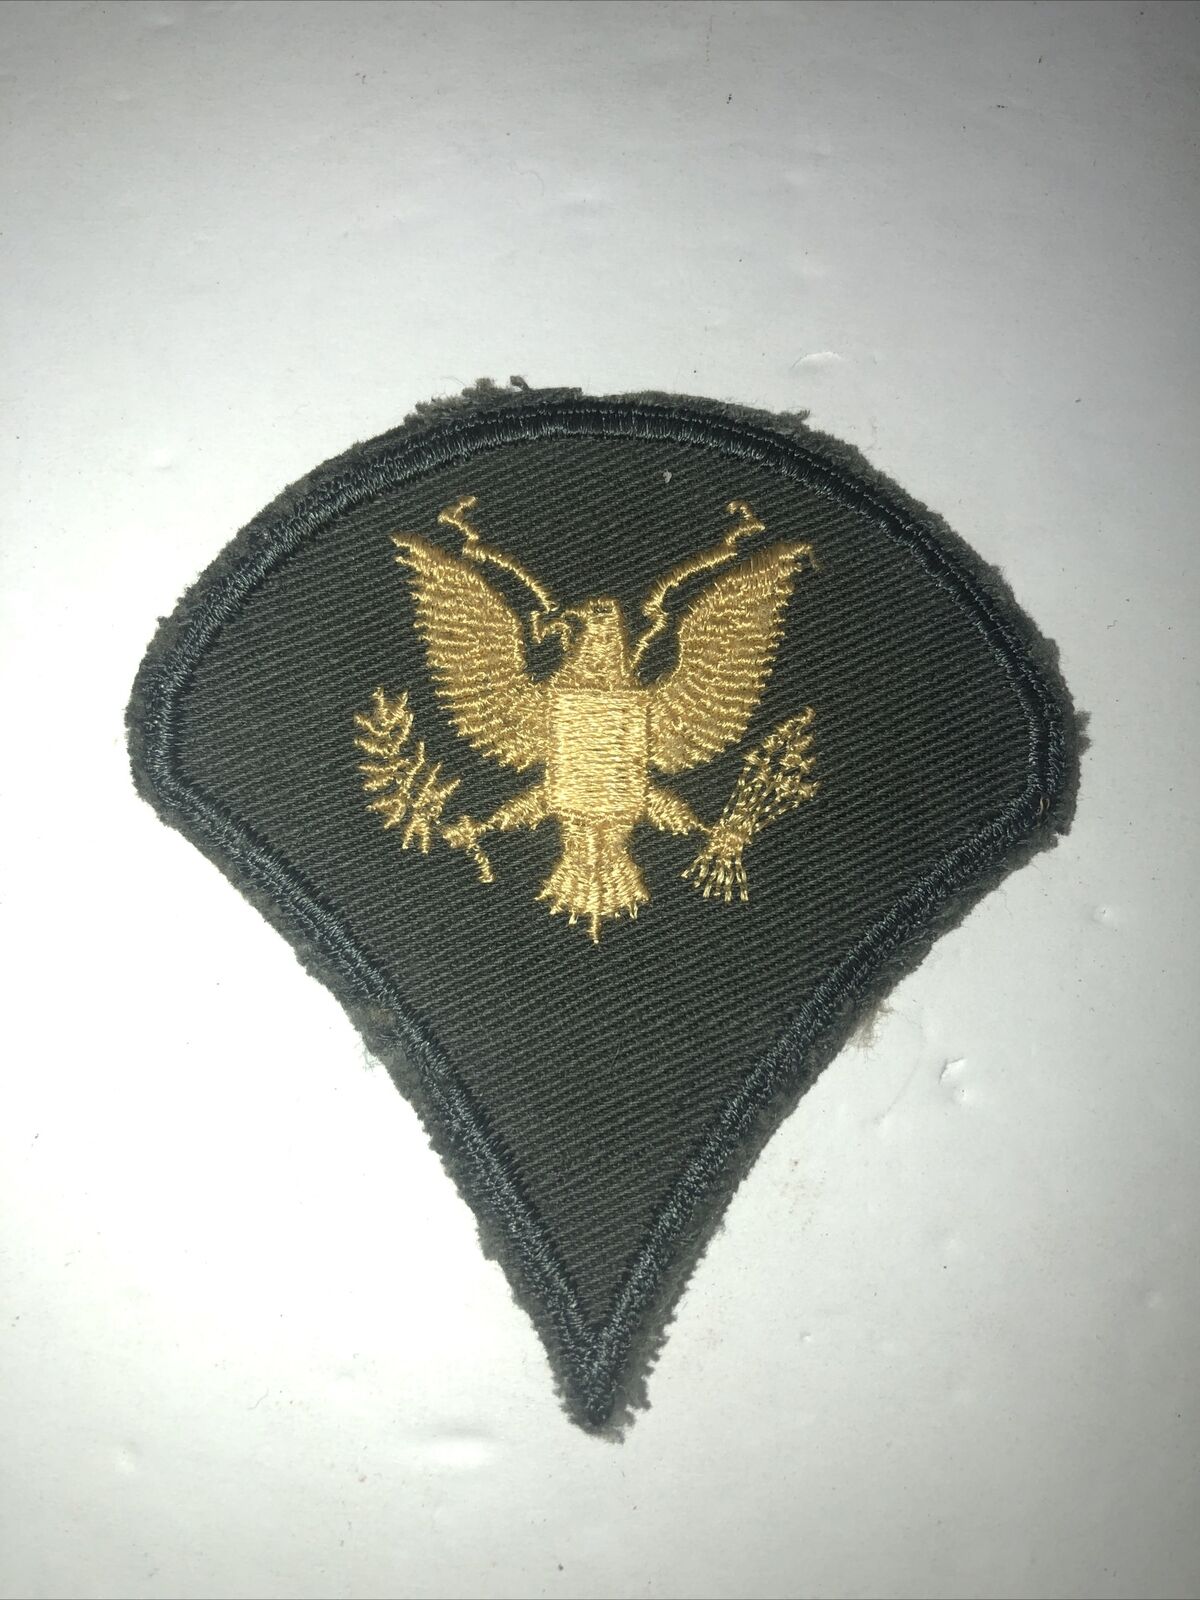 US Army Specialist E4 Rank Gold Eagle WWII Embroidered Patch 